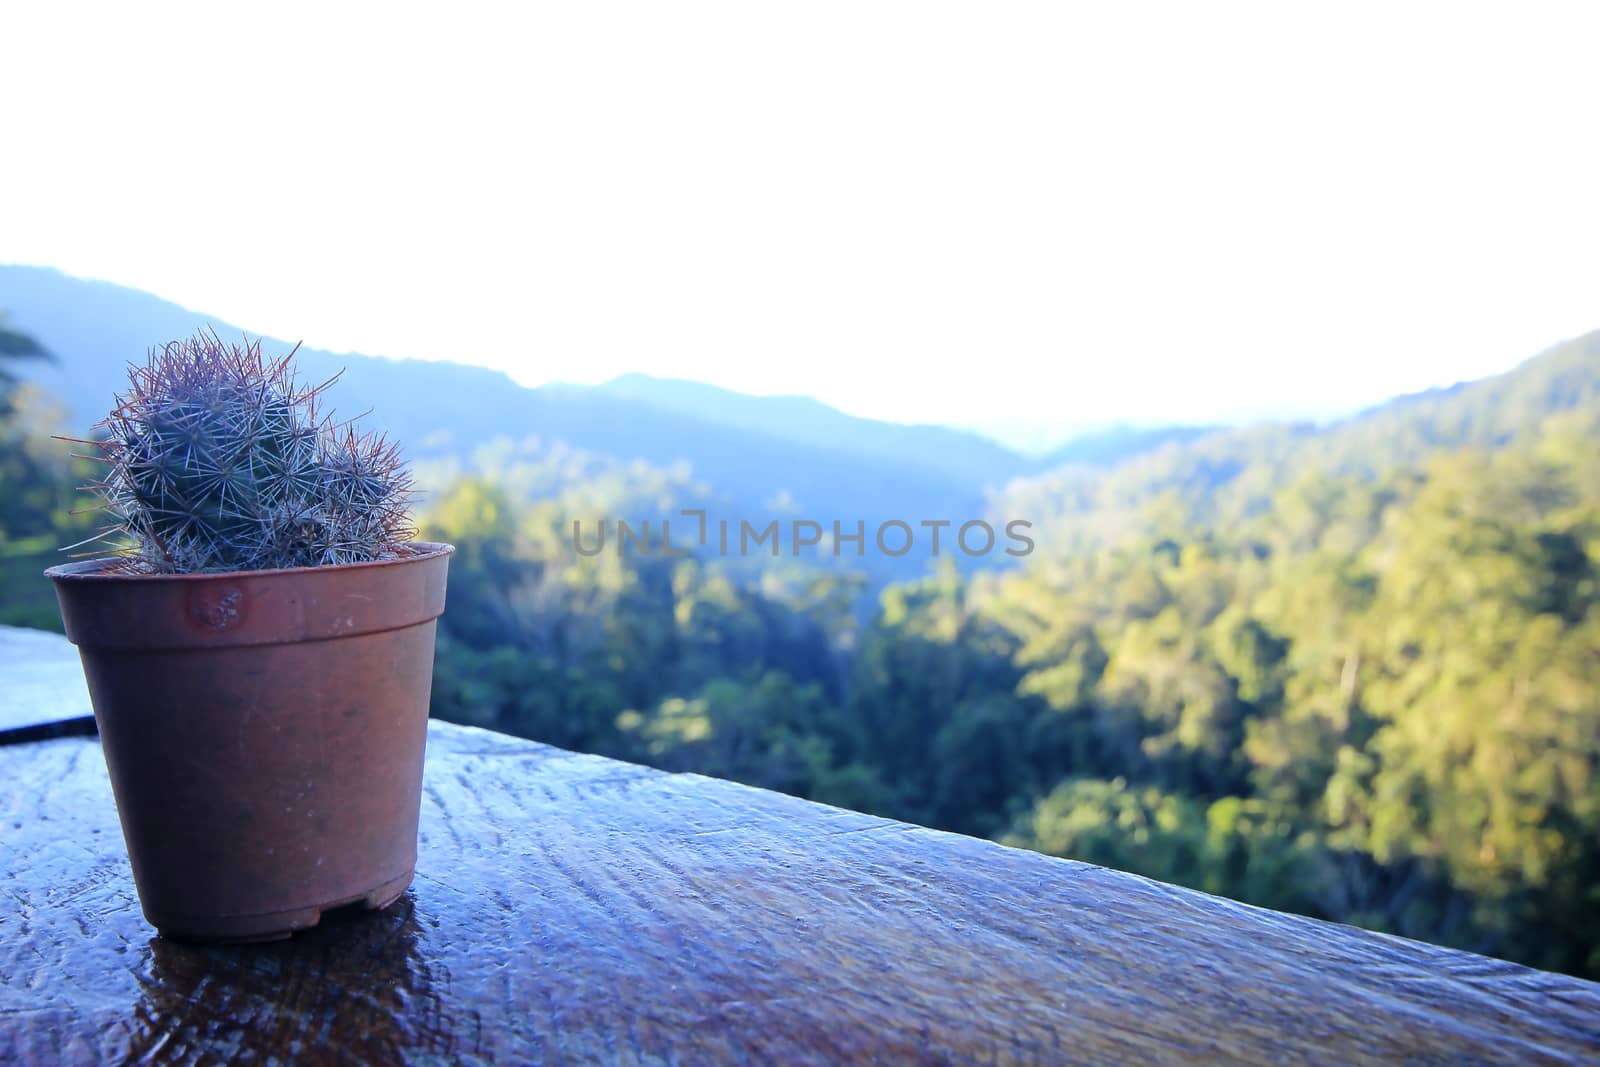 Cactus in pots placed on a wooden balcony